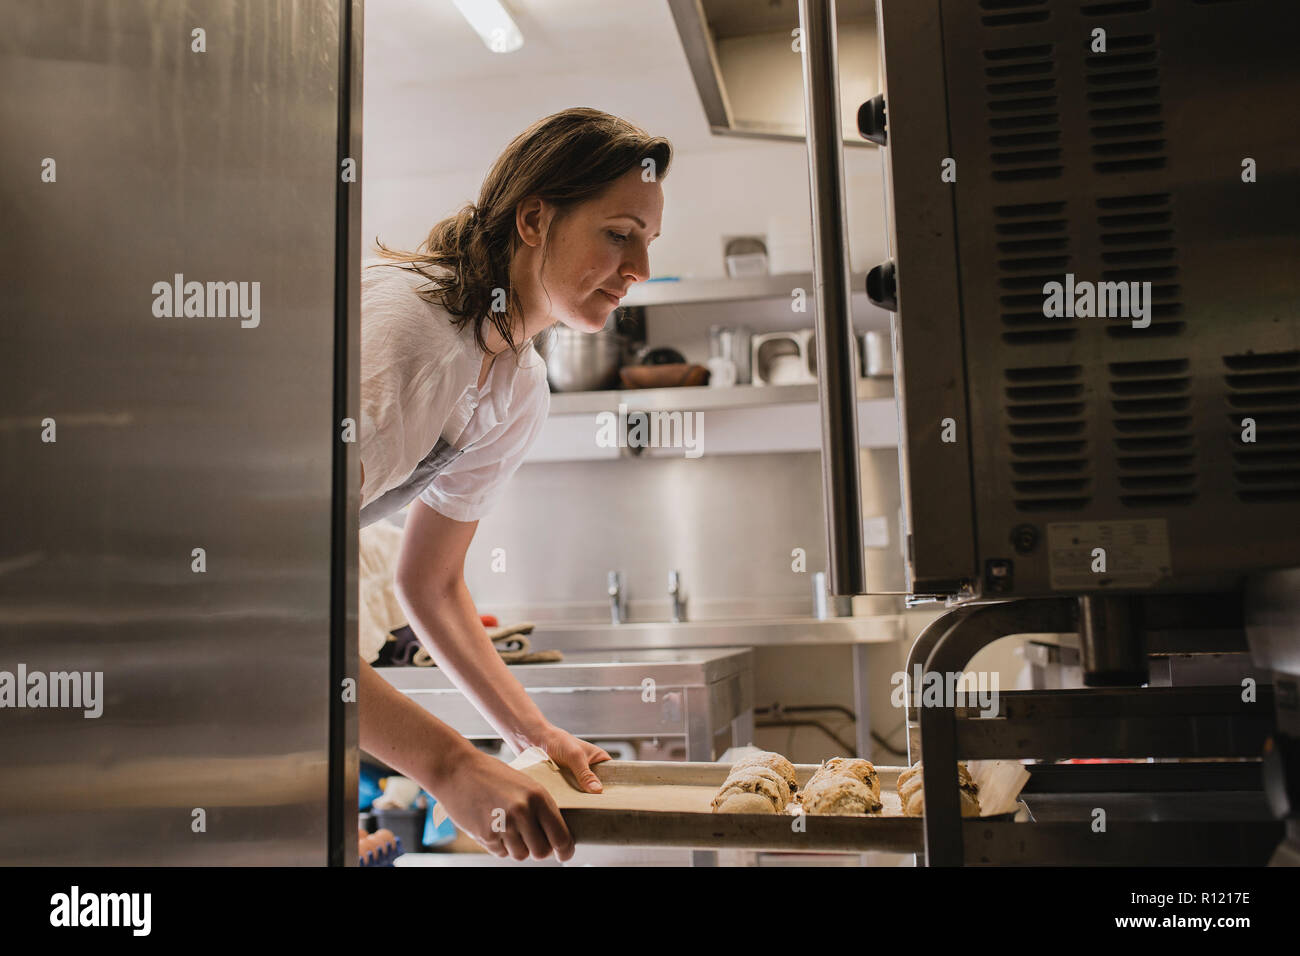 Mid adult female baker placing a tray of uncooked scones into the oven. Stock Photo